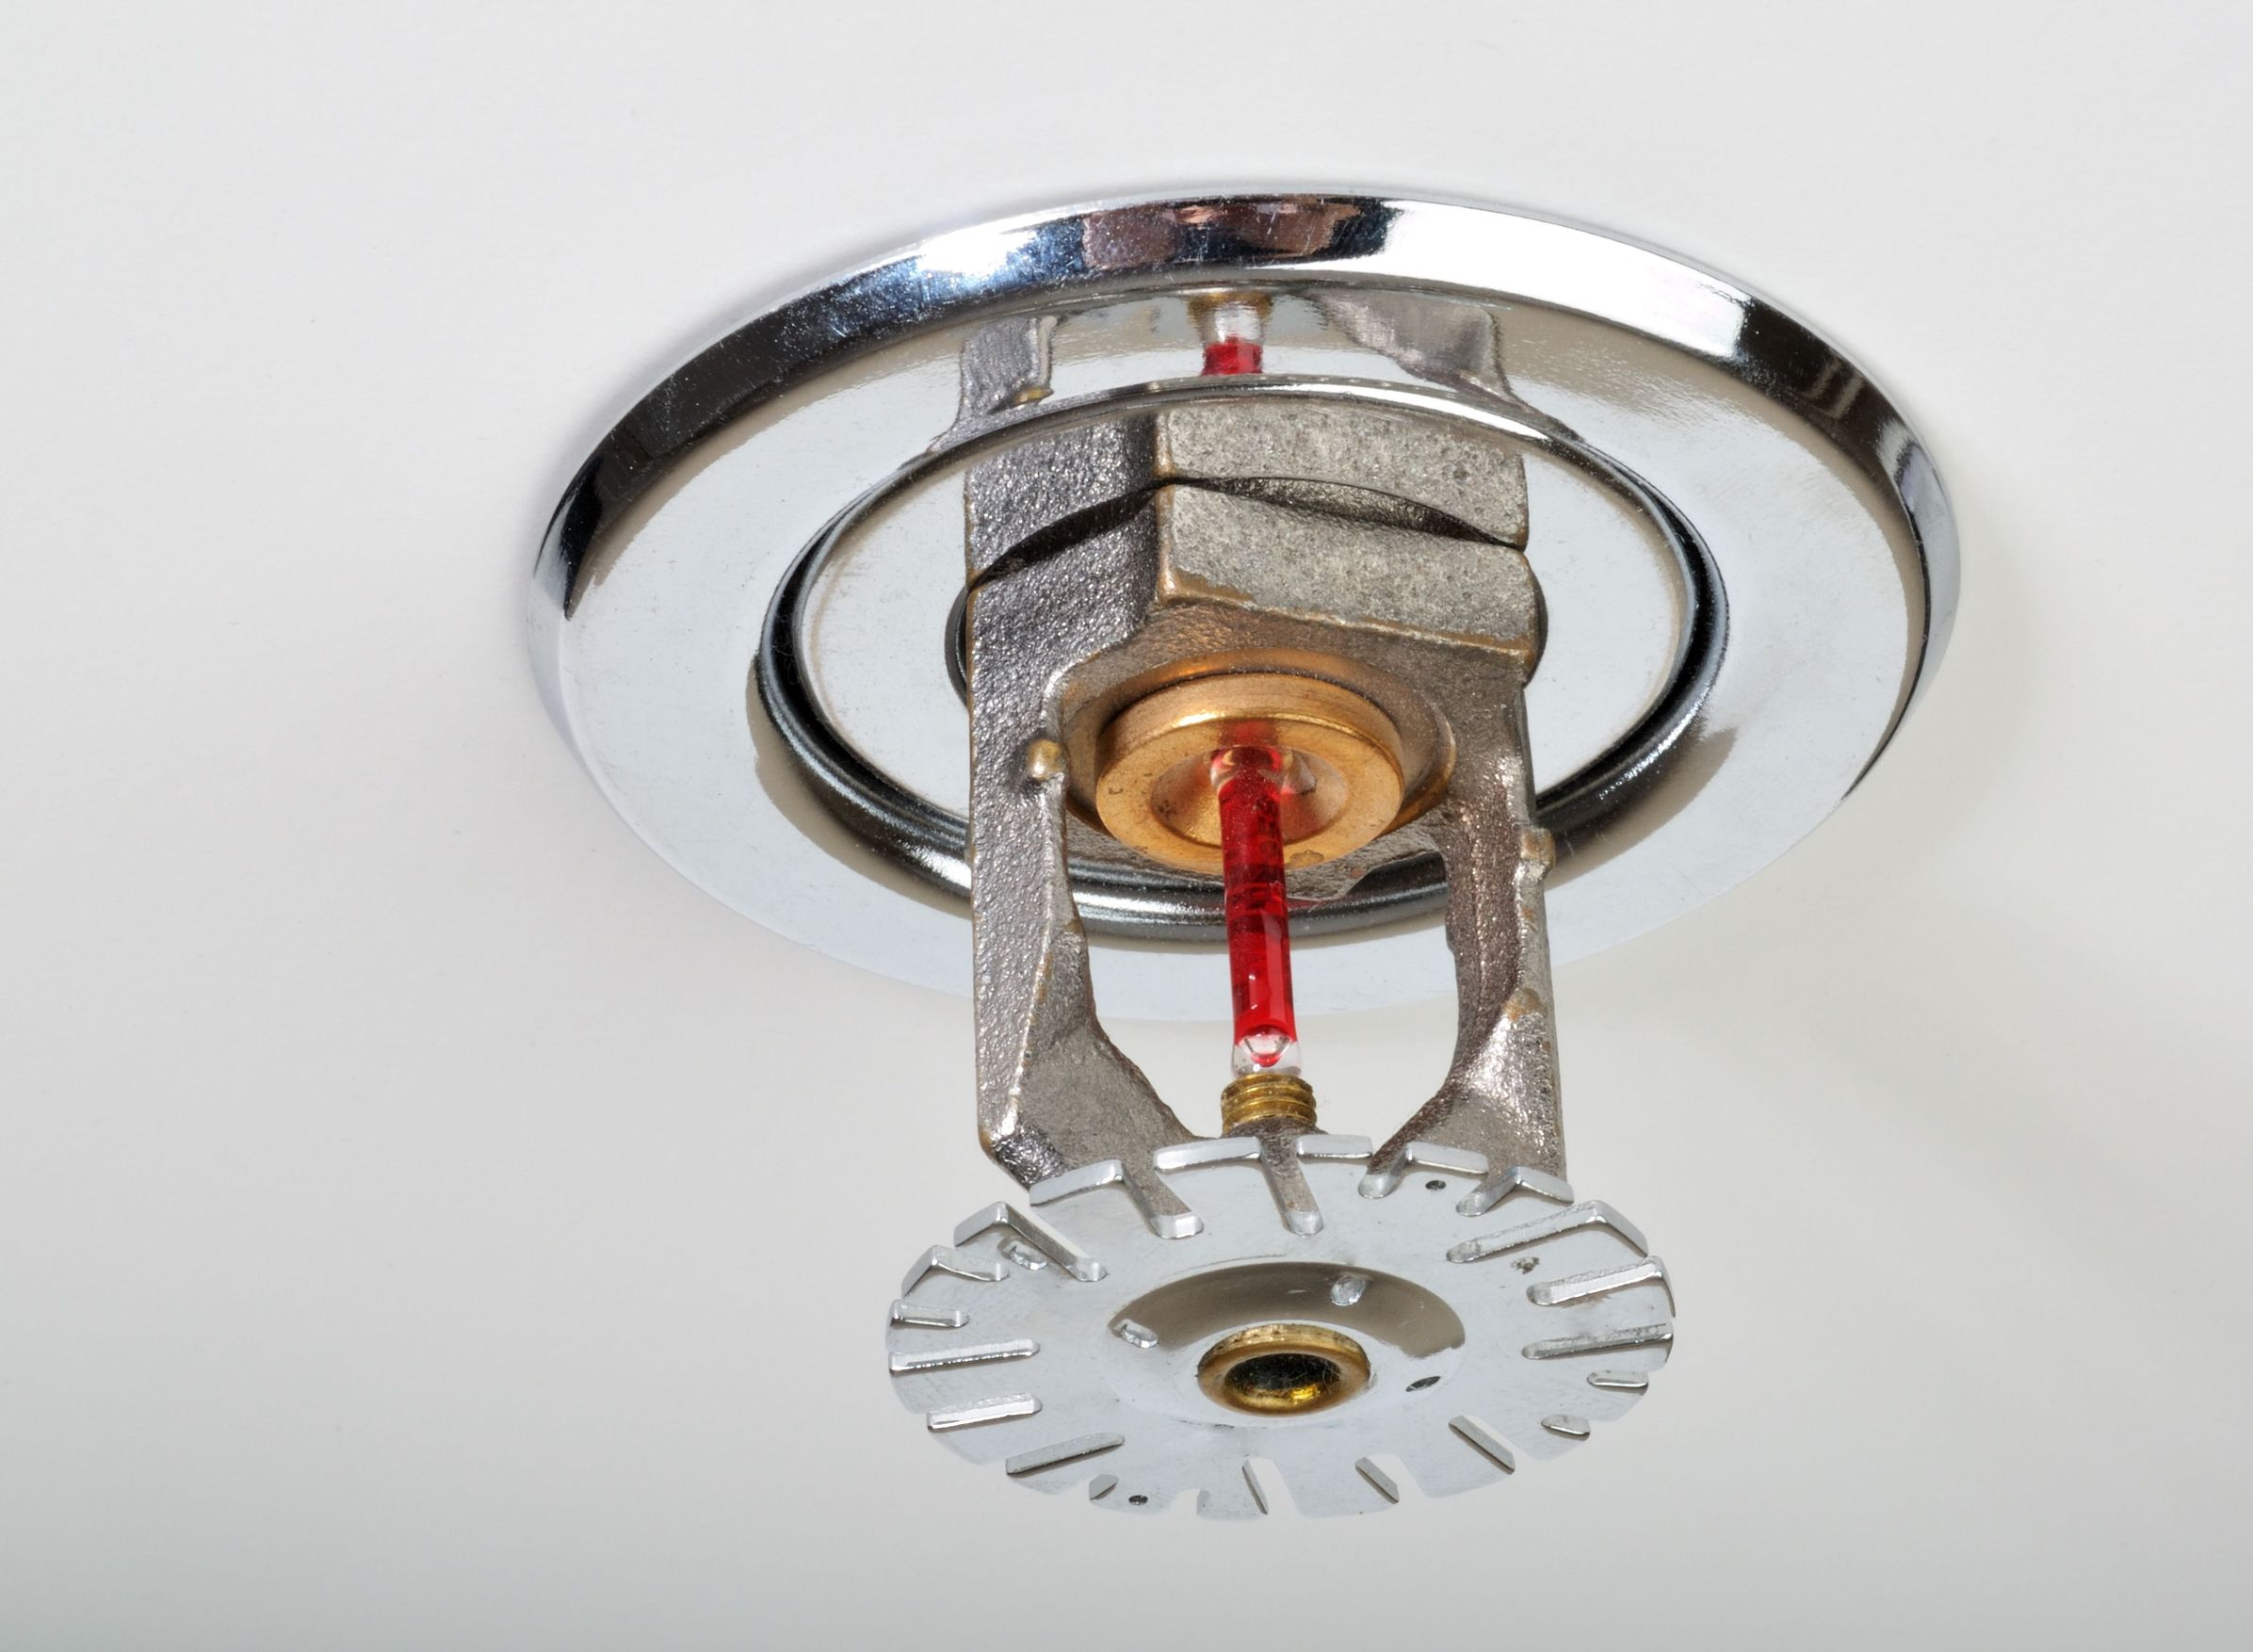 What You Need to Know About Home Fire Protection in Sedalia, MO